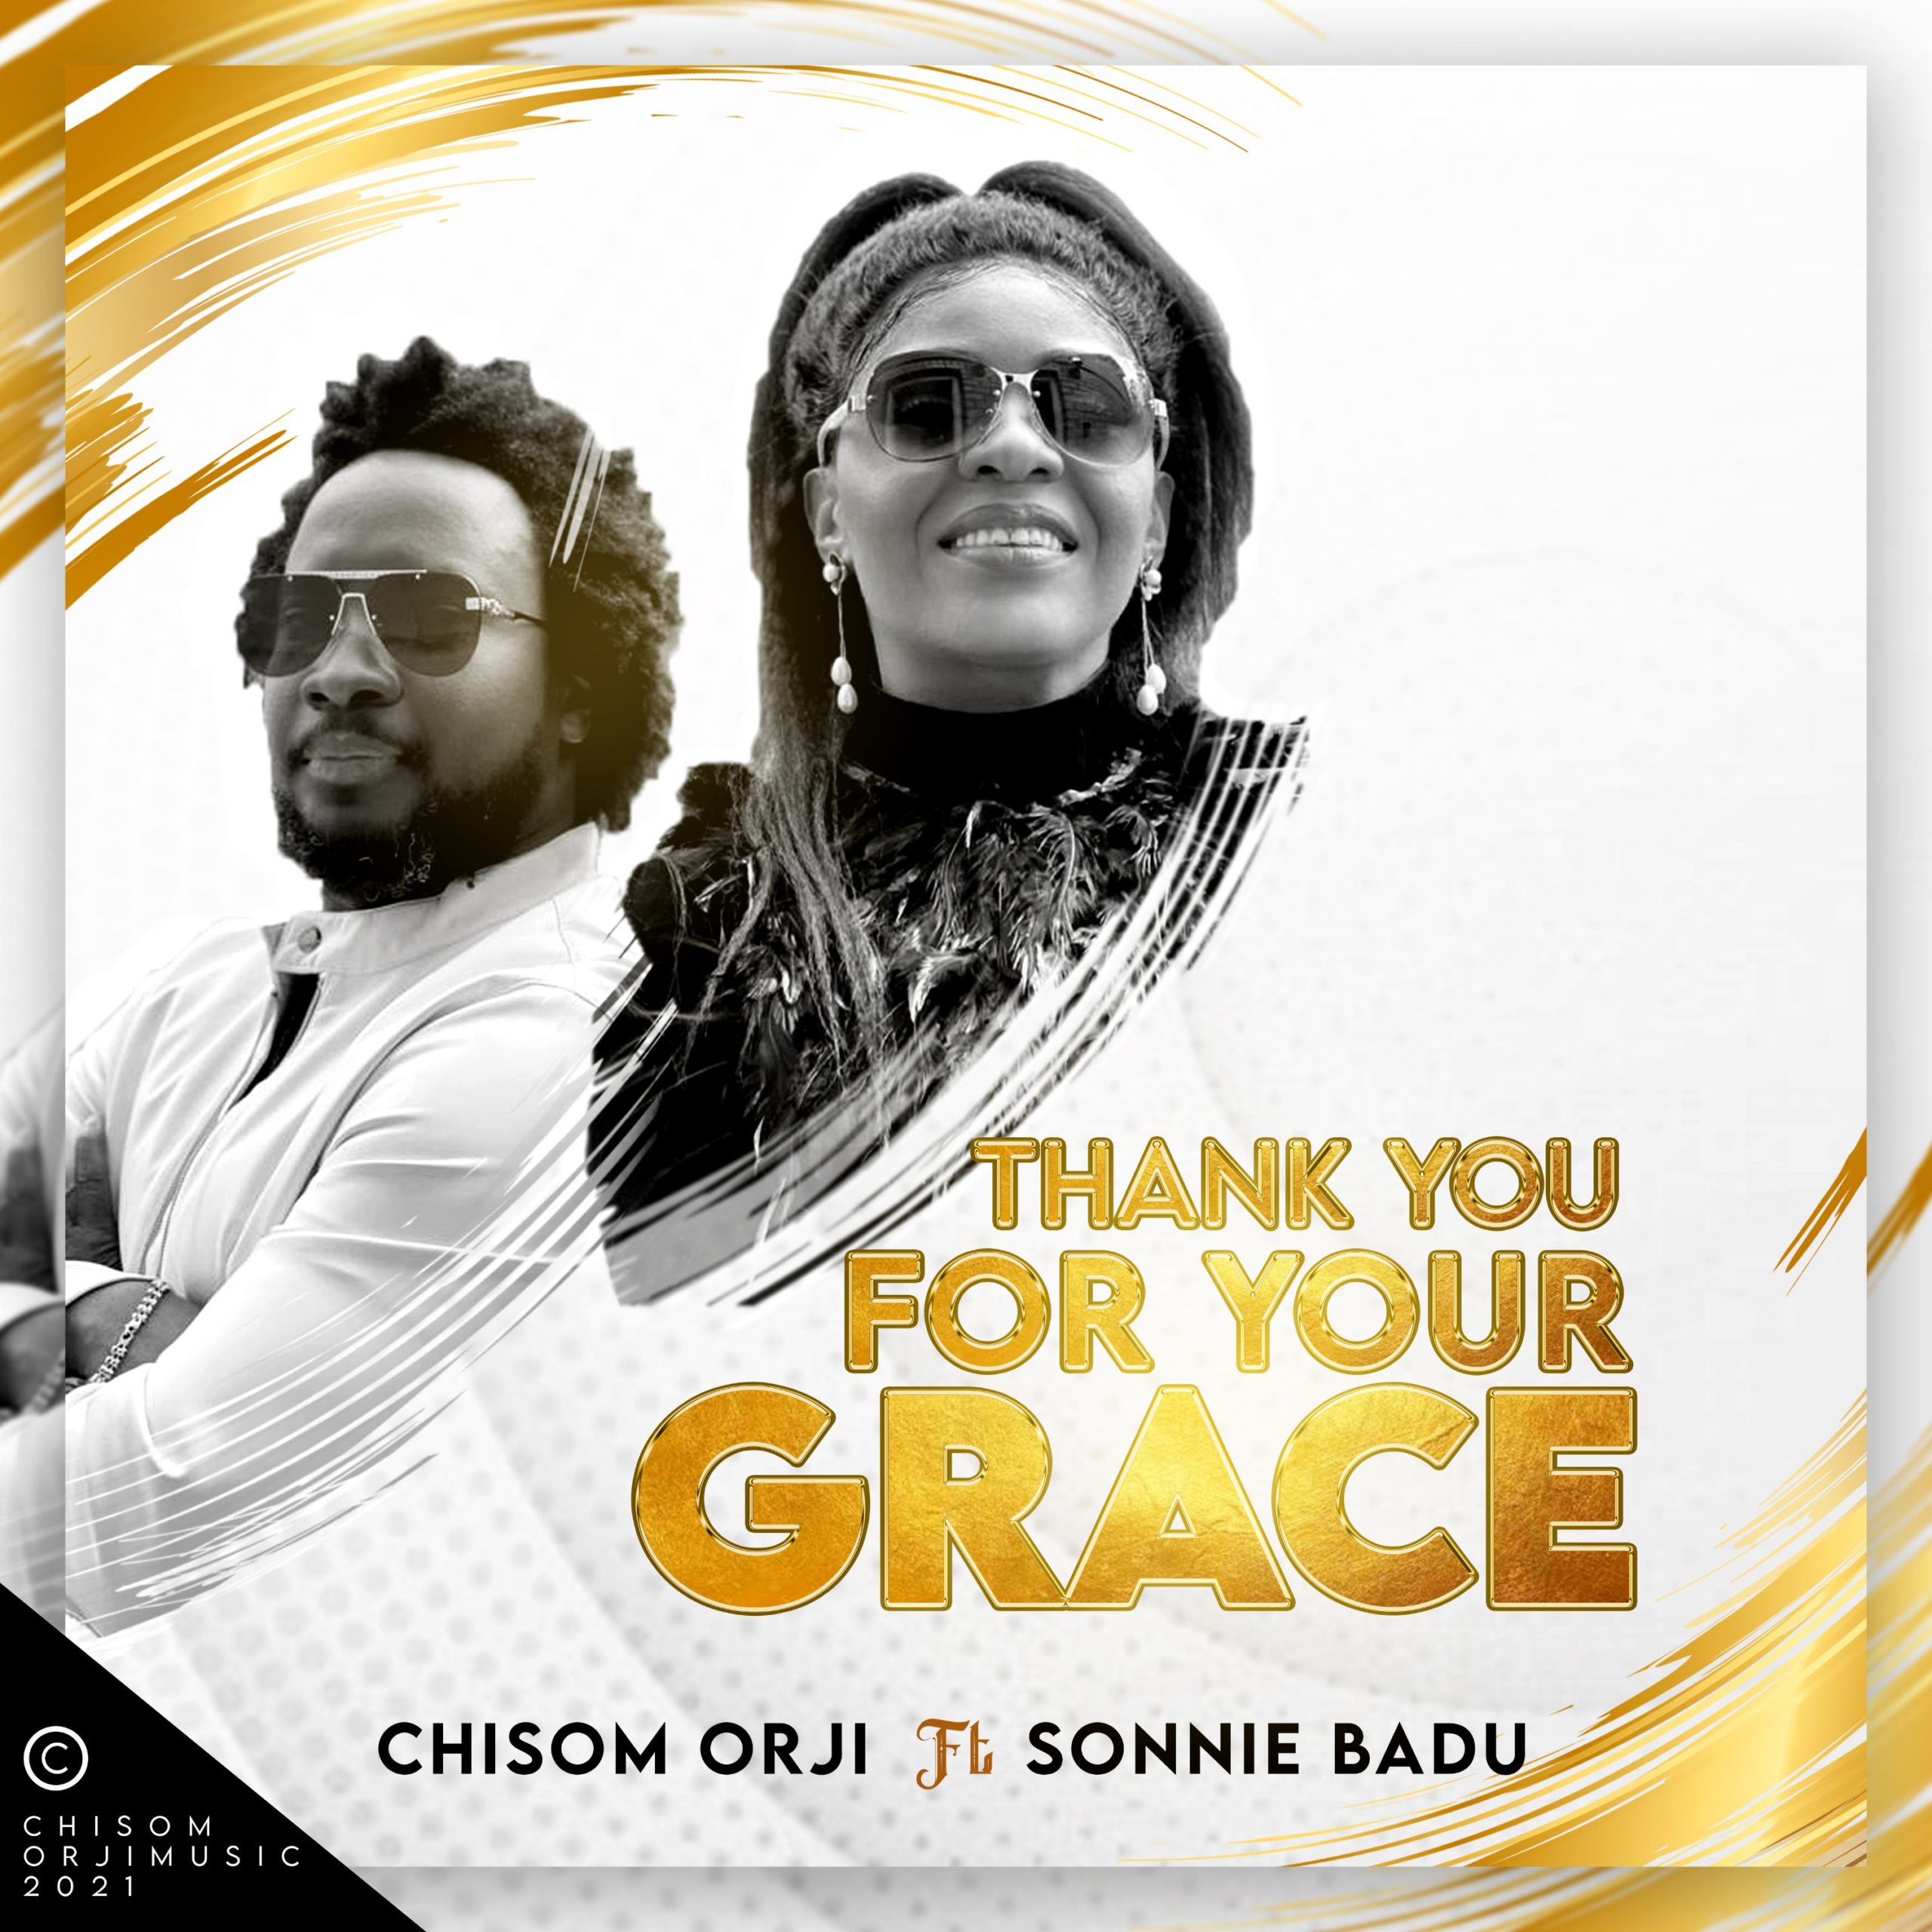 MUSIC Video: Chisom Orji - Thank You For Your Grace (ft. Sonnie Badu)